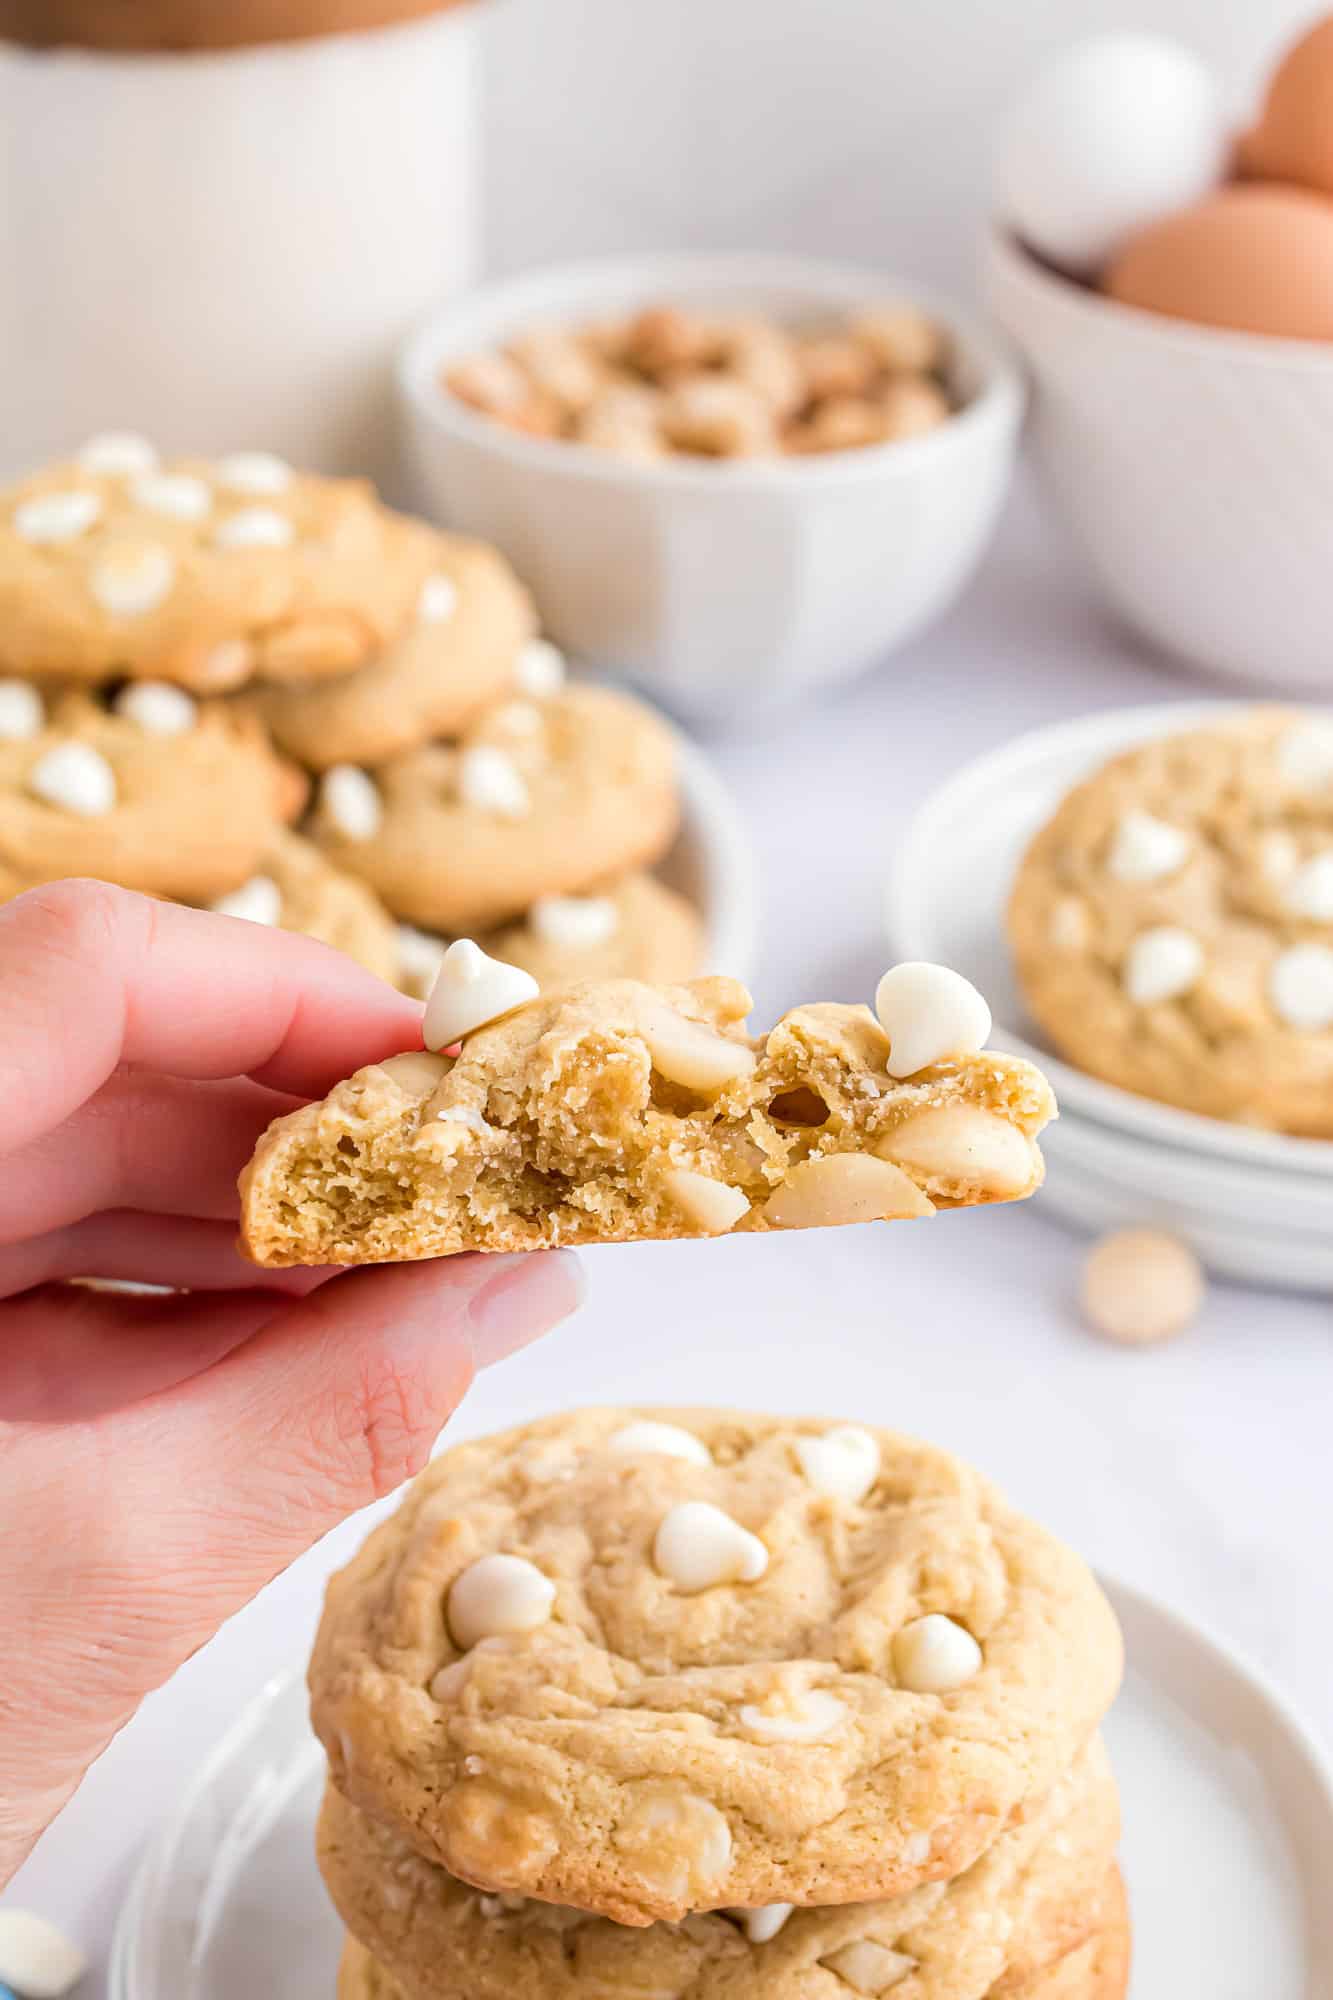 A hand holding up one half of a white chocolate macadamia nut cookie, with more cookies on a plate in the background.